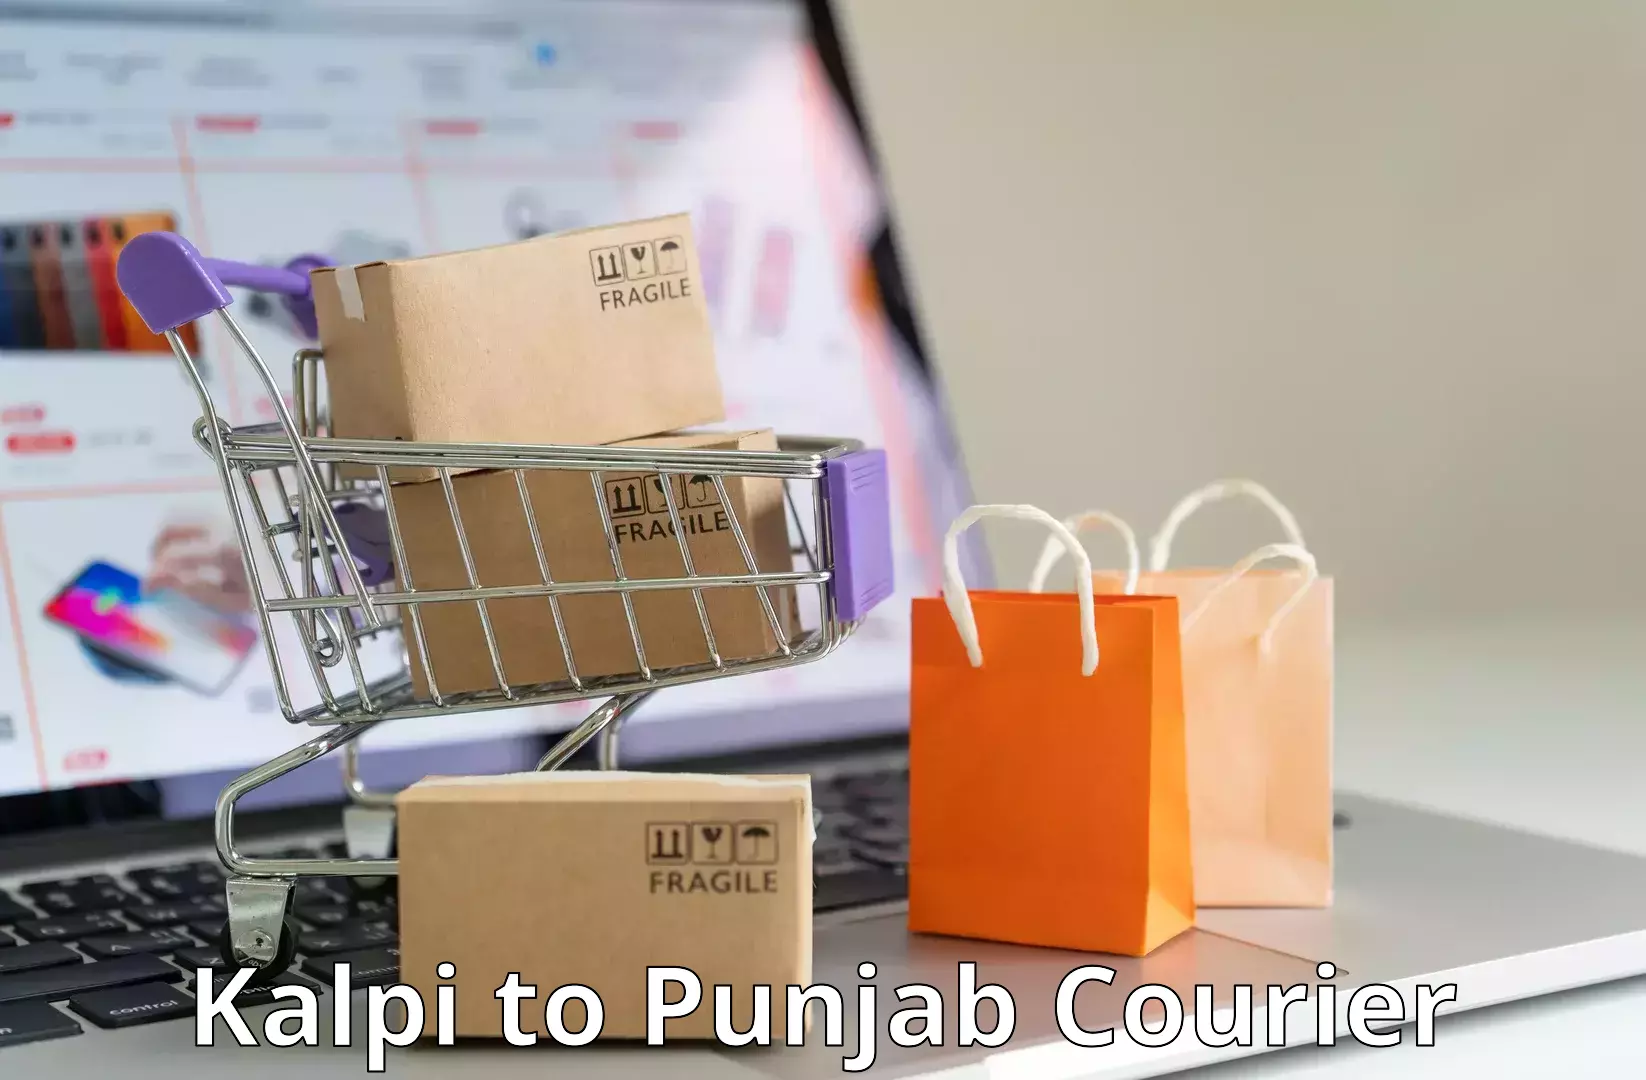 Flexible delivery schedules Kalpi to Punjab